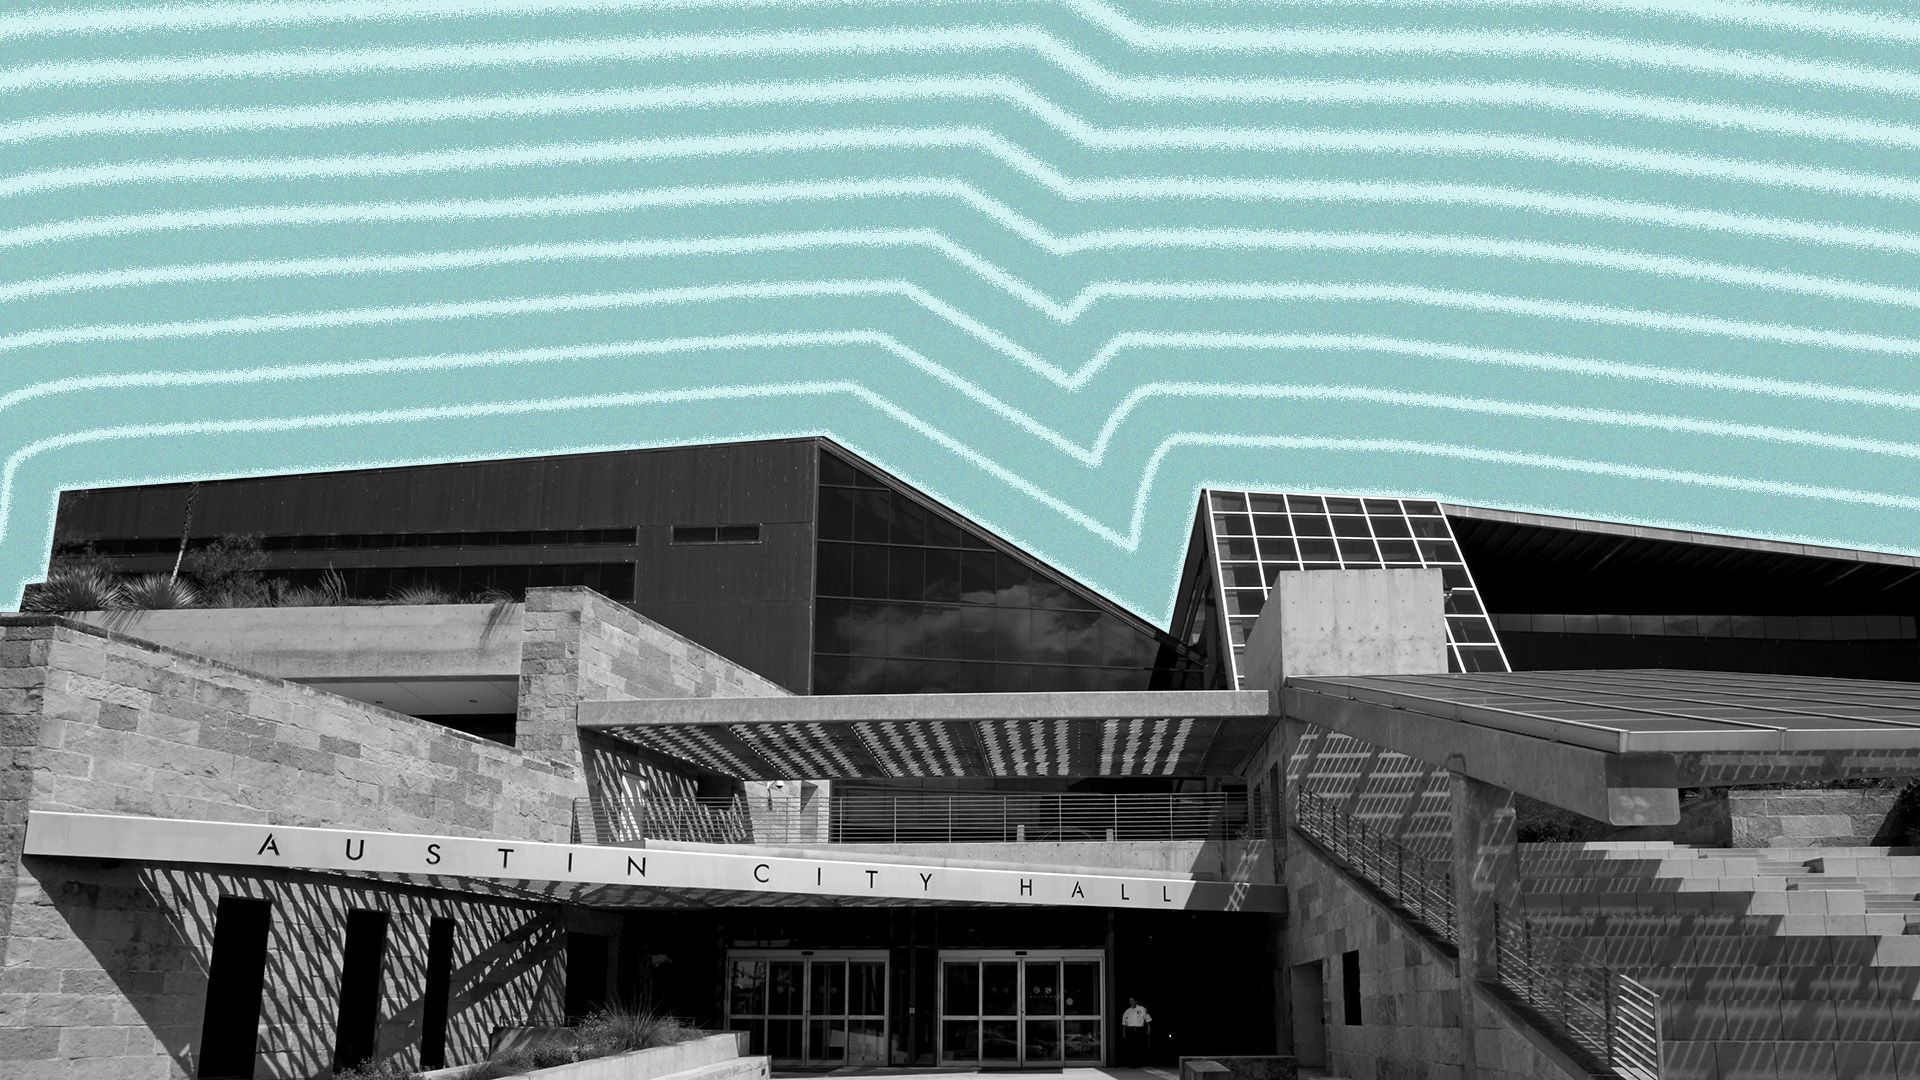 Illustration of Austin City Hall with lines radiating from it.